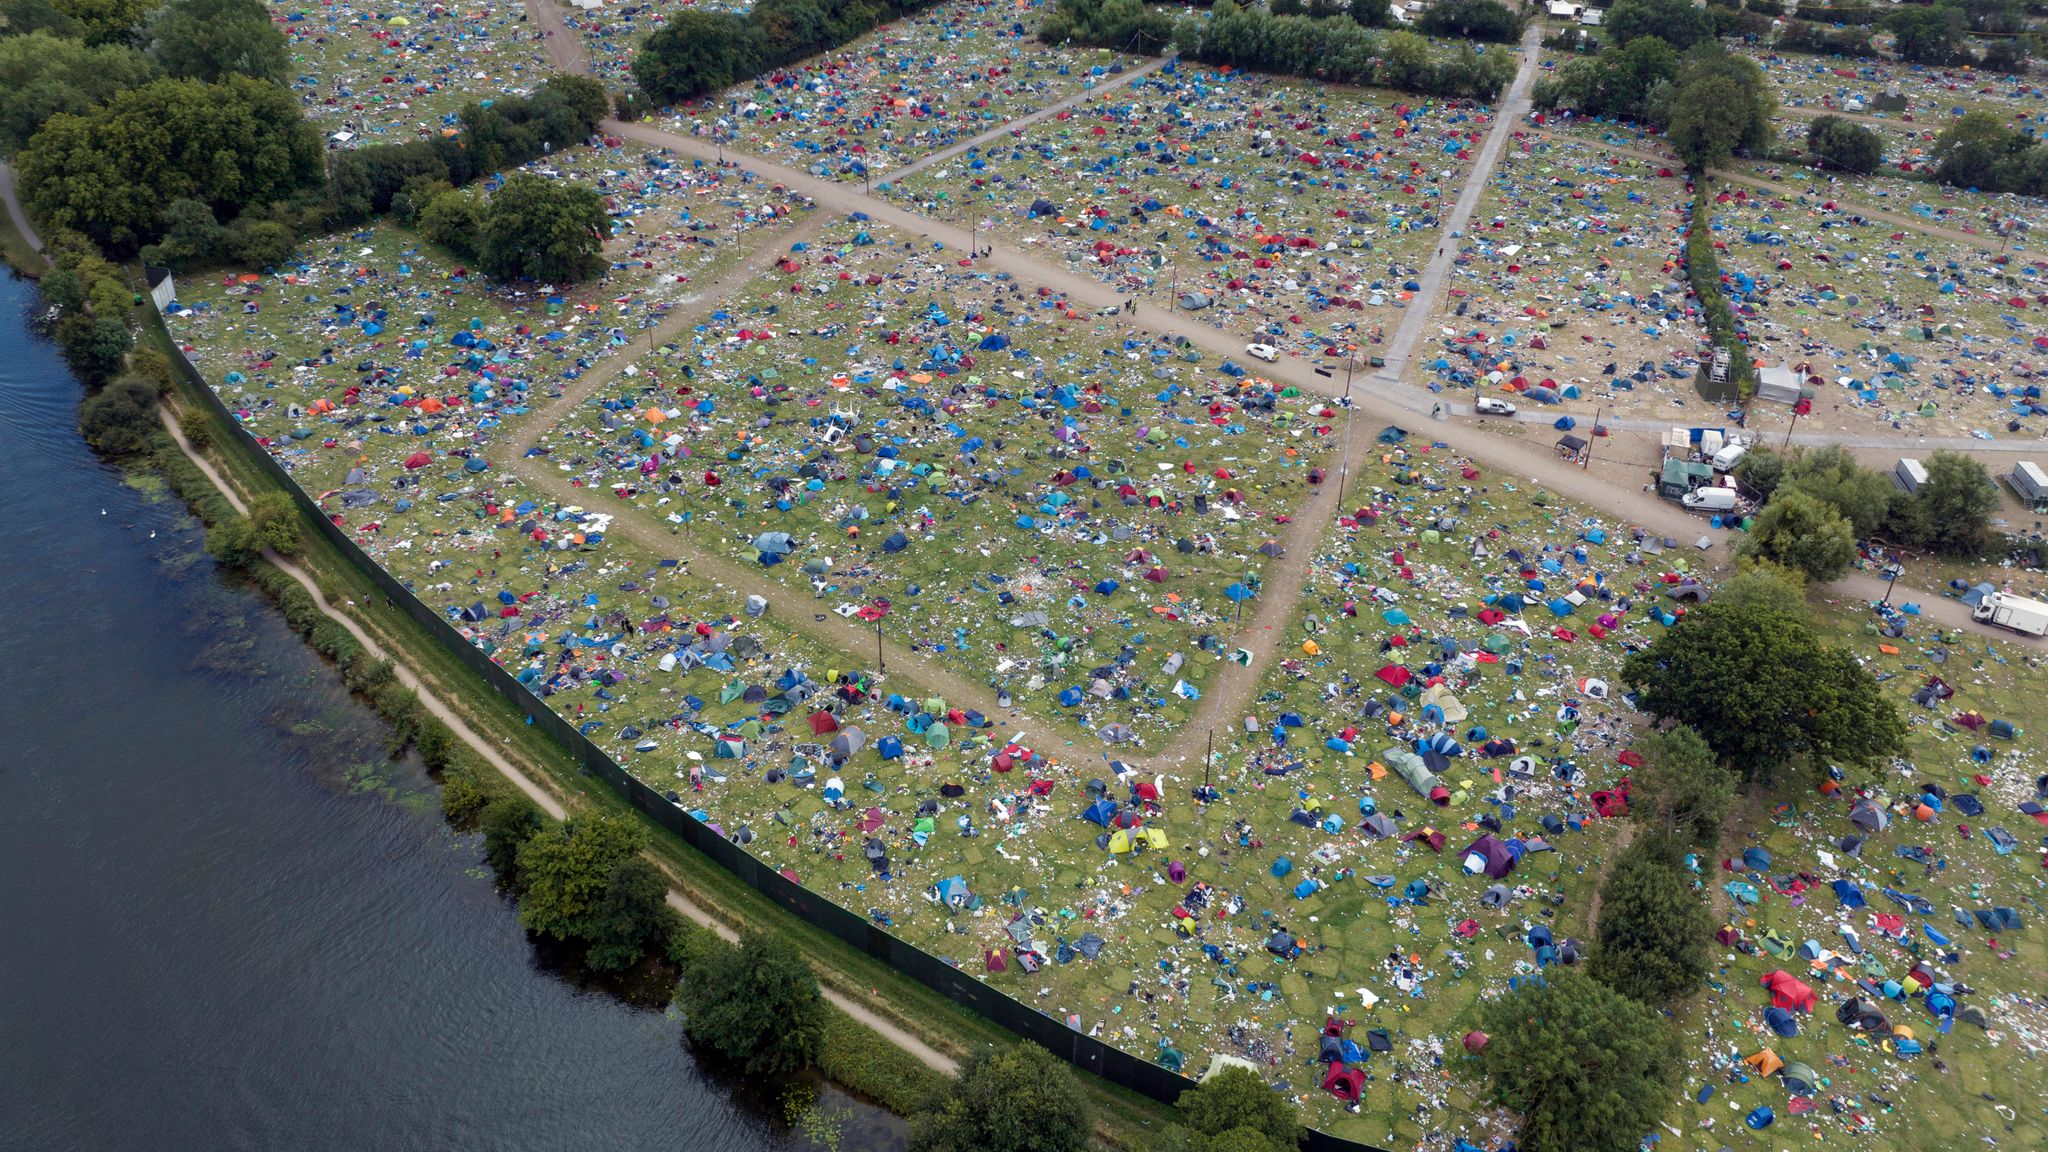 Drone footage shows wasteland of abandoned tents and rubbish left after Reading  festival | UK News | Sky News